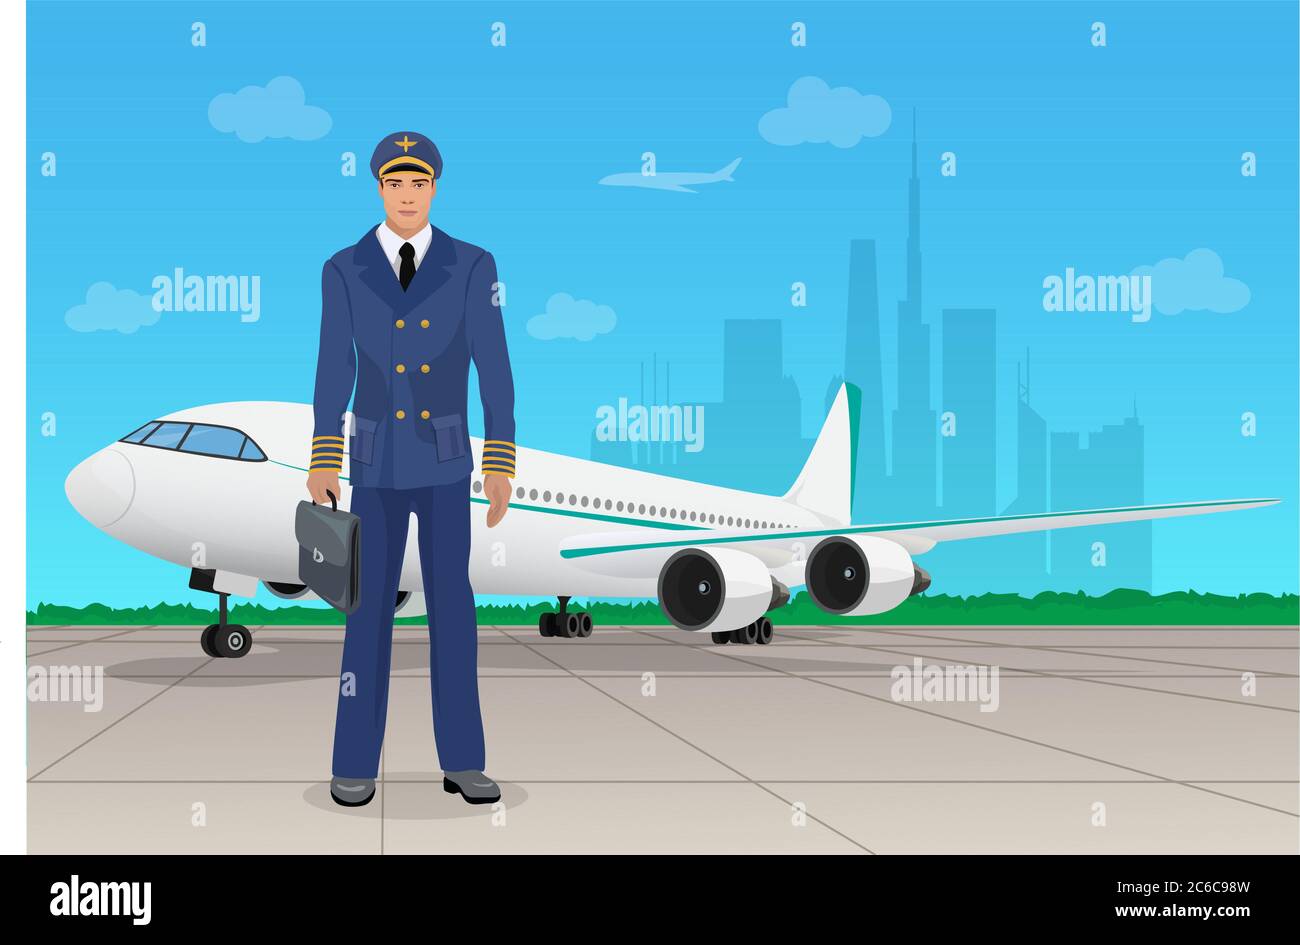 Pilot in uniform near airplane in airport. Vector illustration Stock Vector